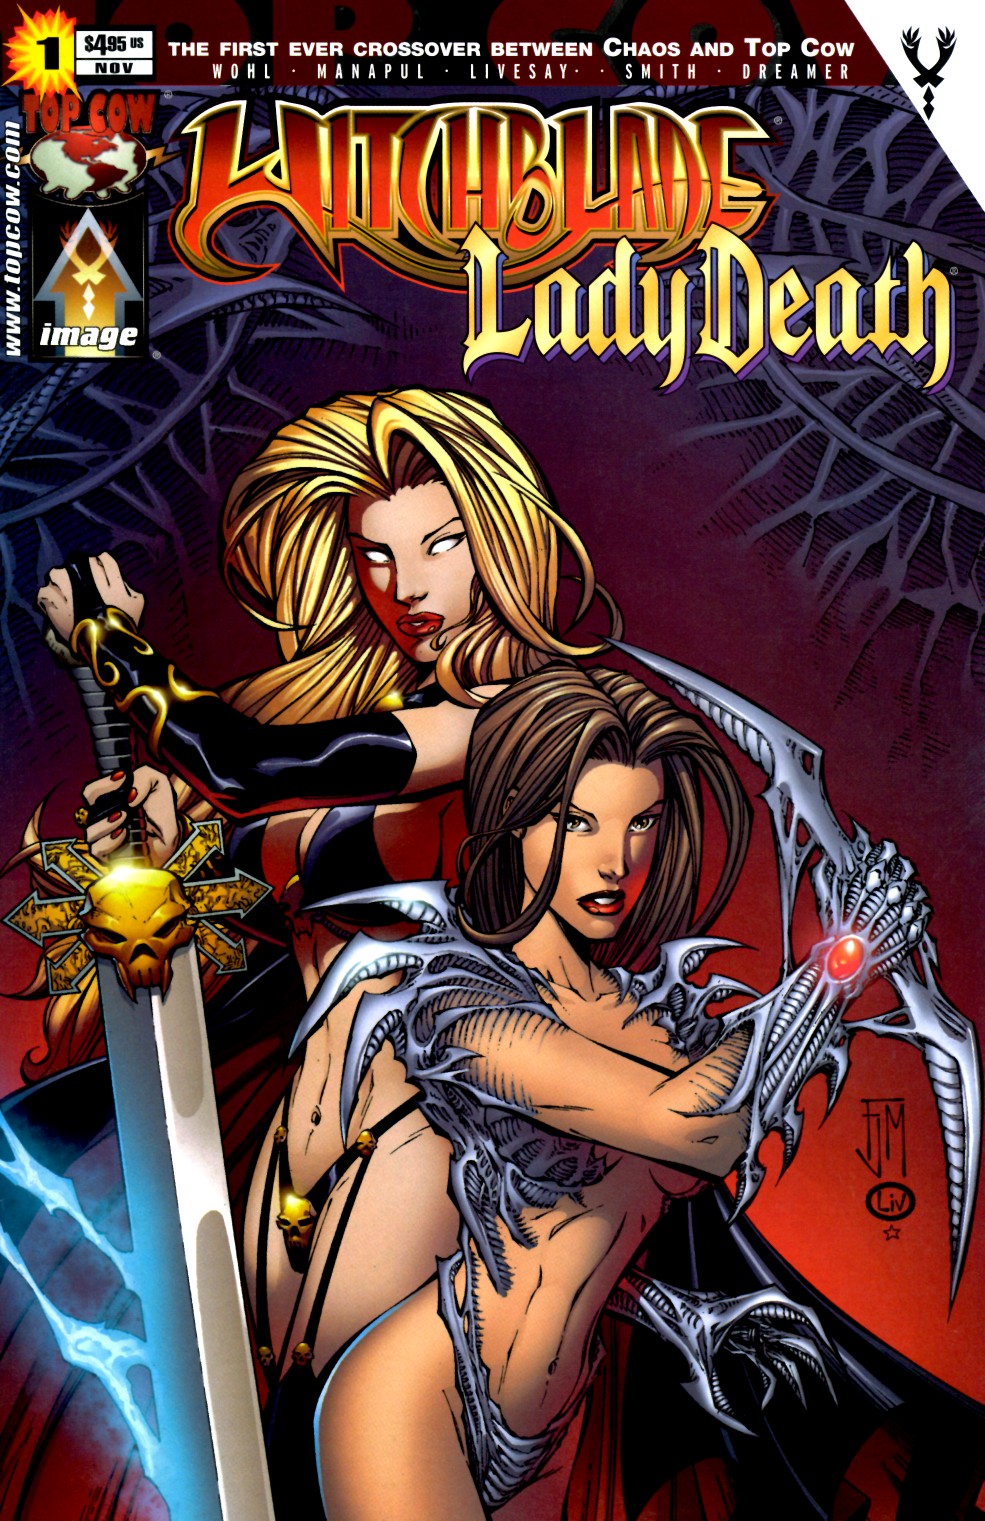 Read online Witchblade/Lady Death comic -  Issue # Full - 1